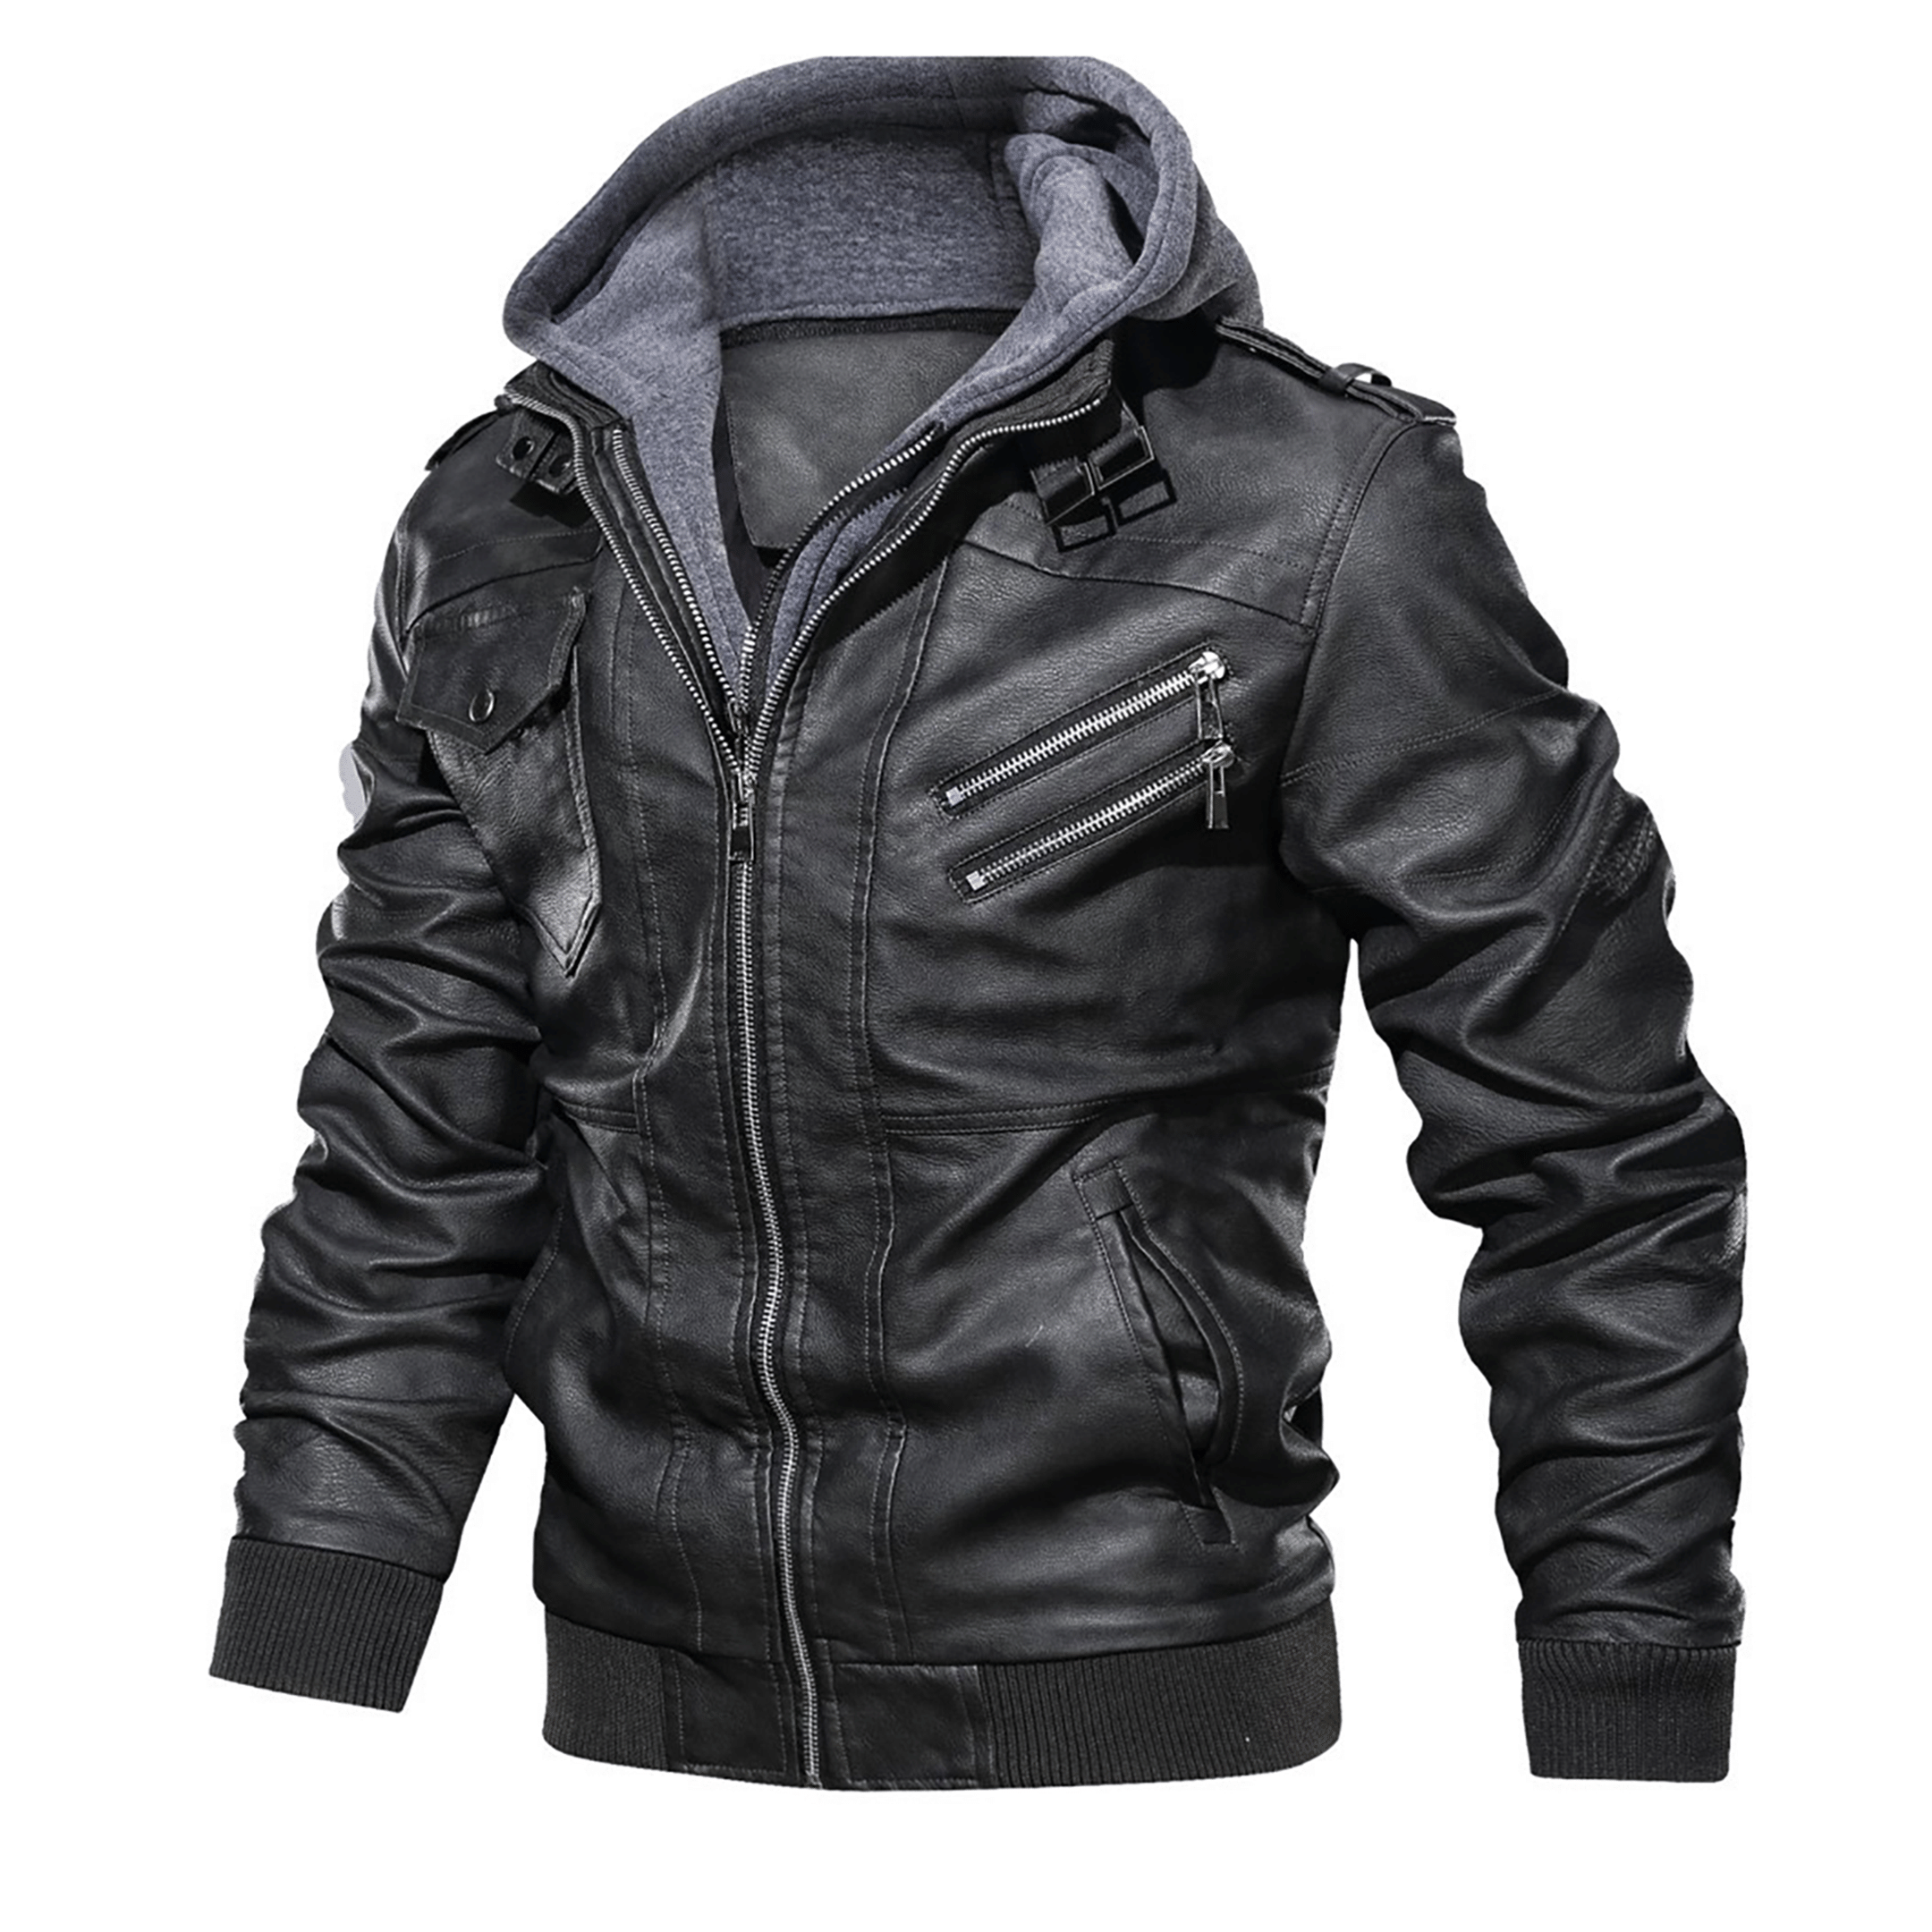 Top leather jackets and latest products 427